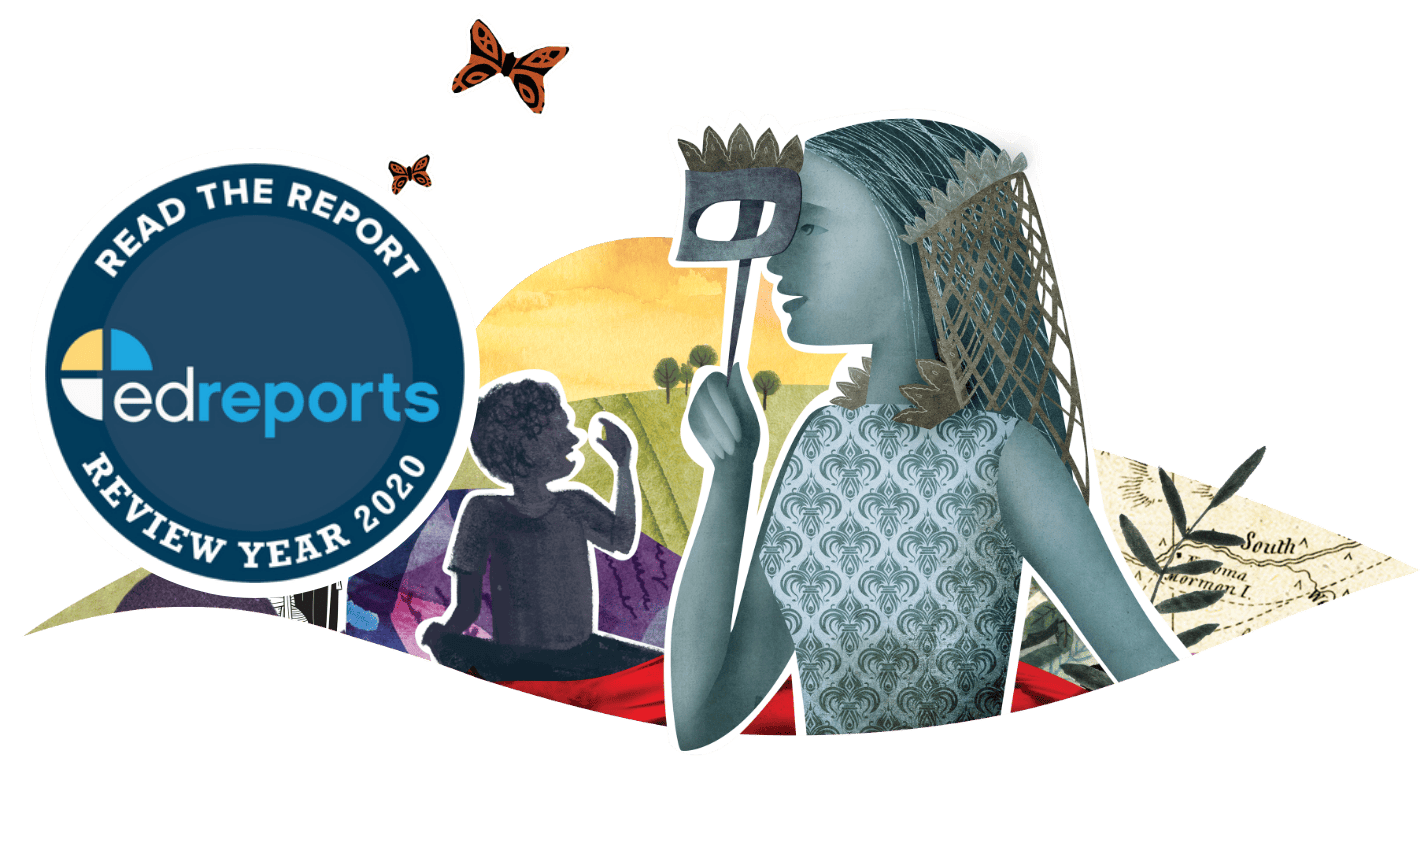 Collage-style graphic featuring a woman with a cutout crown, silhouettes of children studying, a butterfly, against colorful, layered backdrops and an EdReports badge saying 